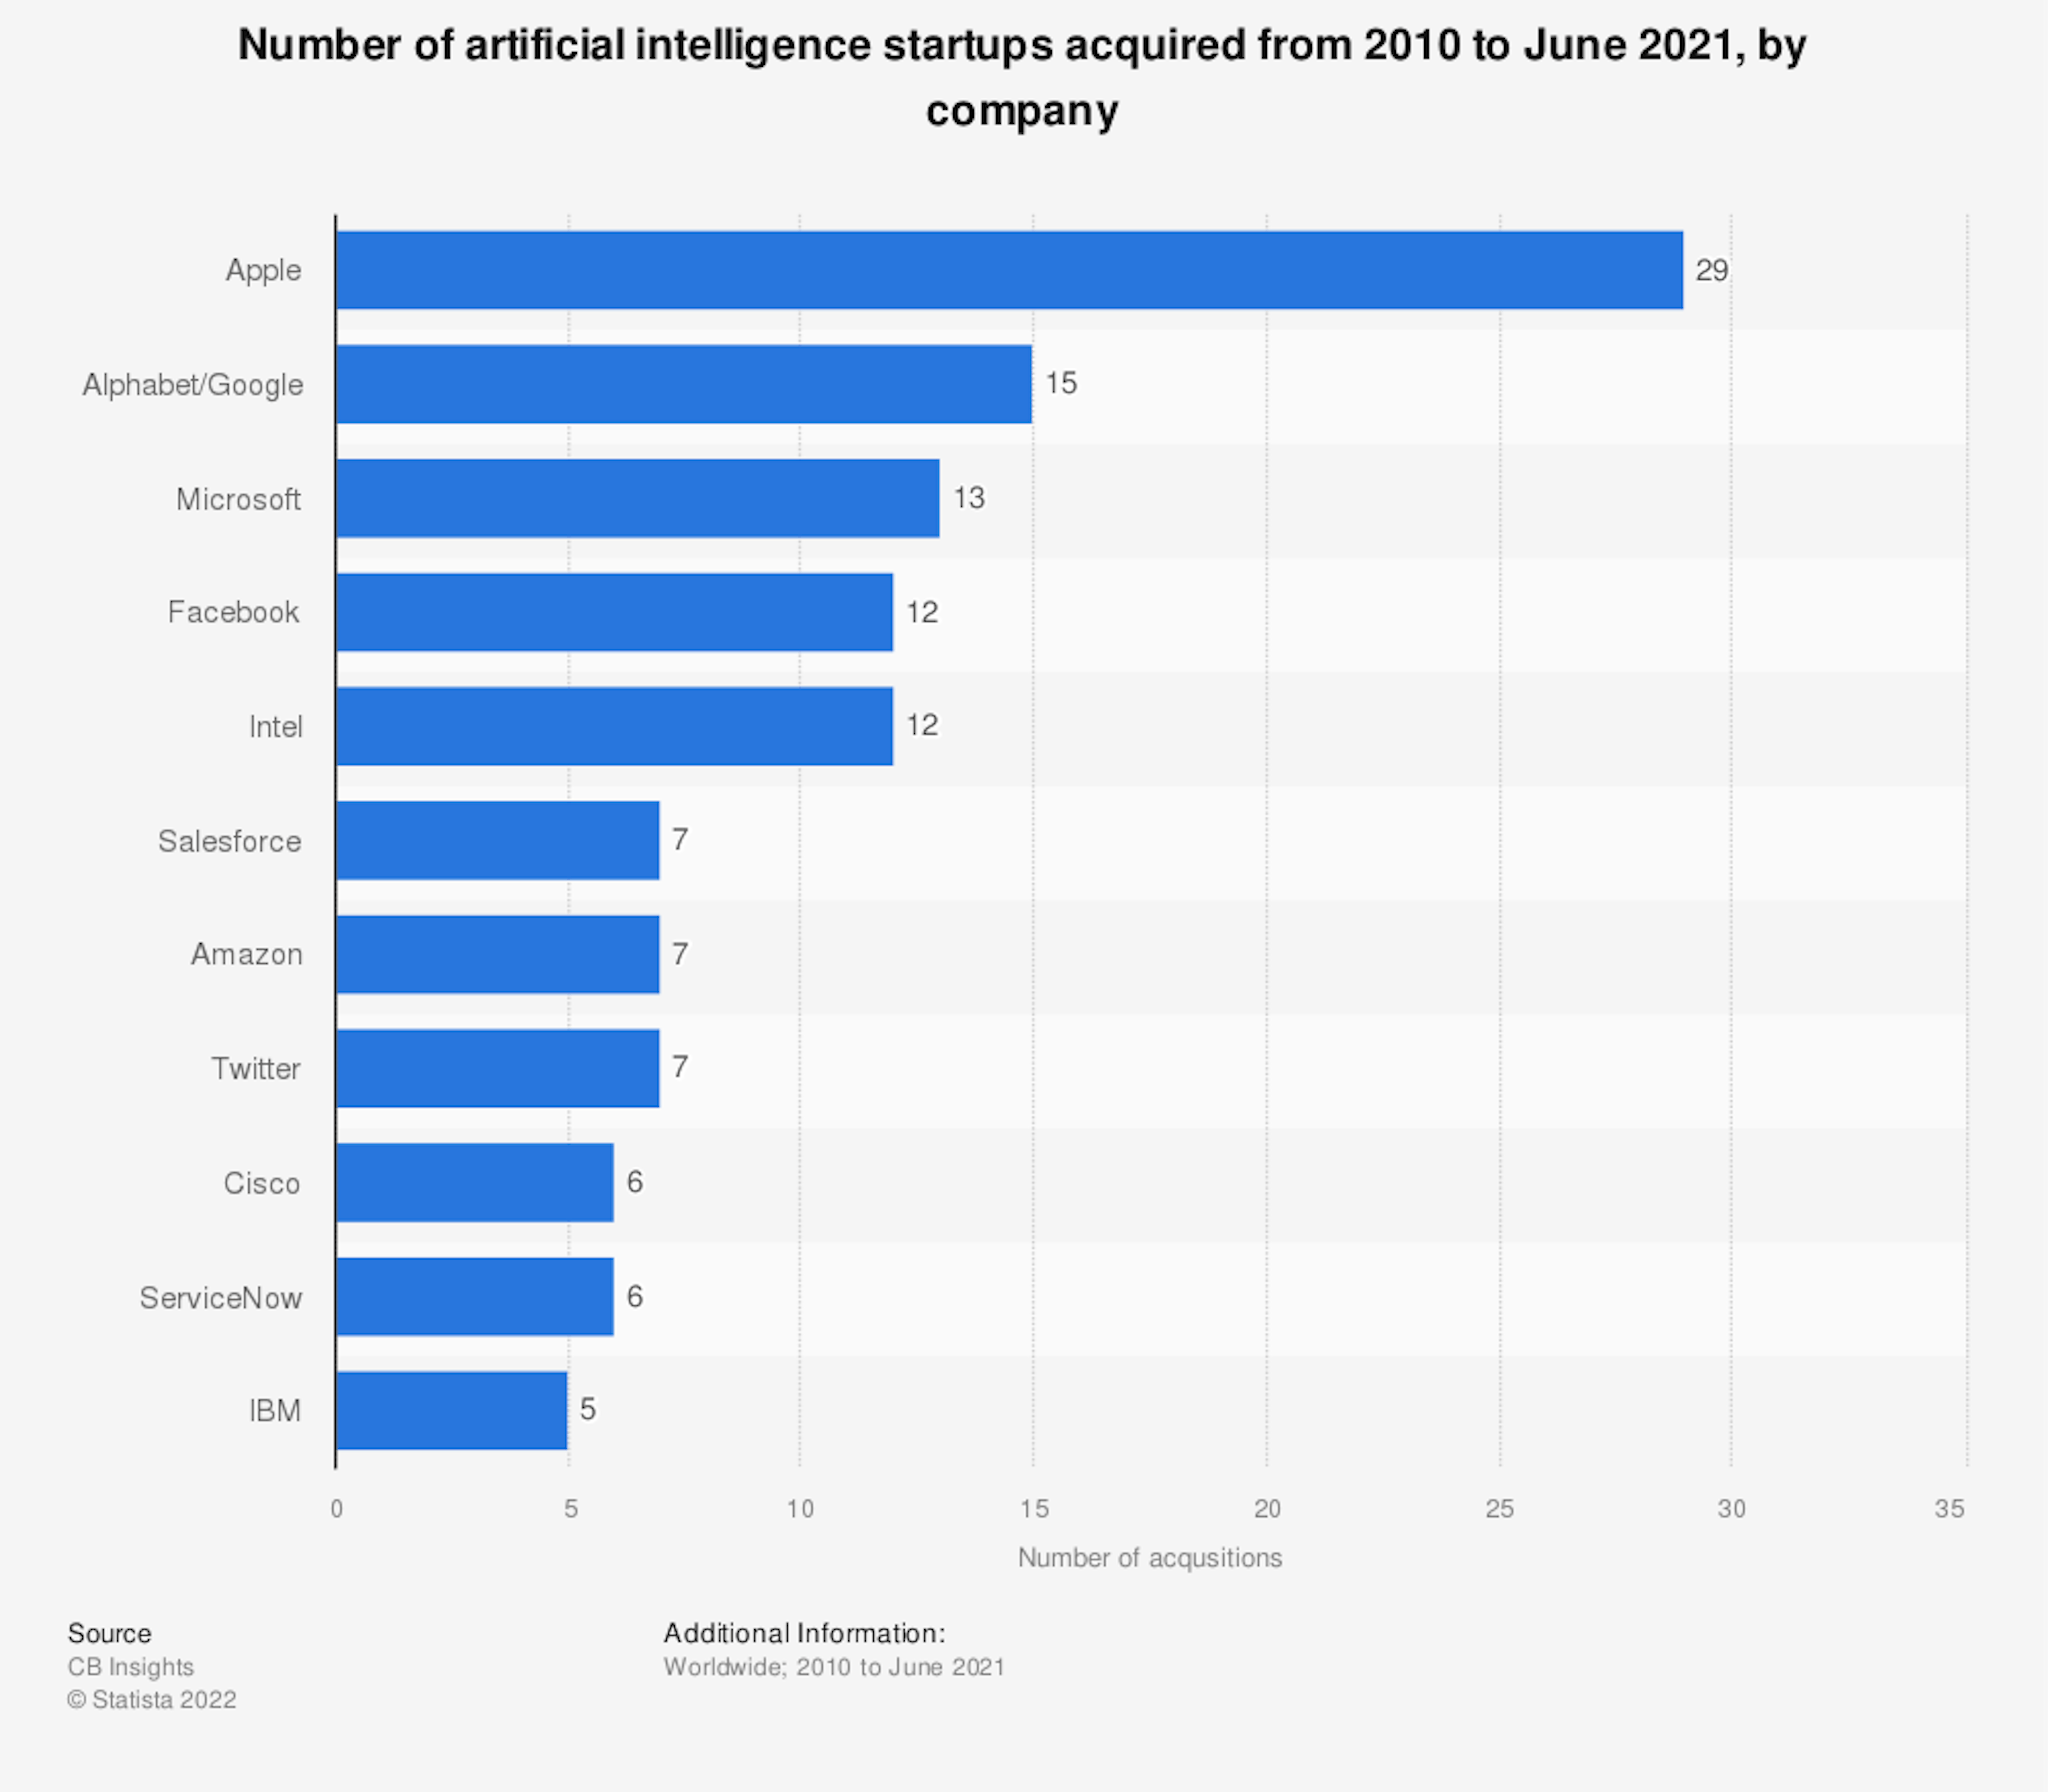 Number of artificial intelligence startups acquired from 2010 to June 2021, by company